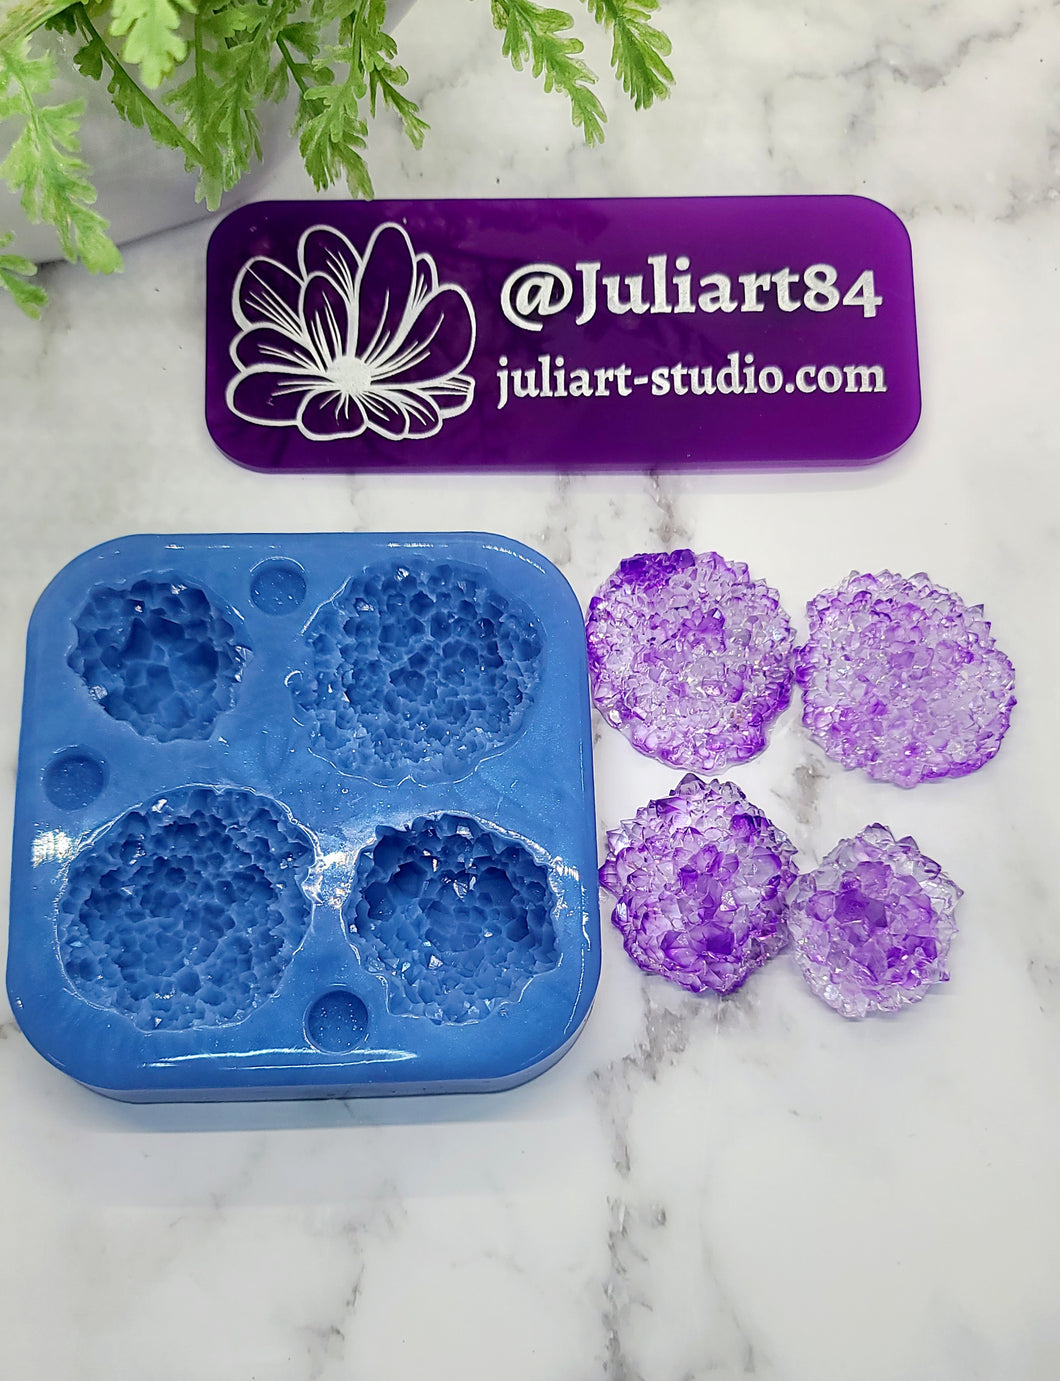 1.25 - 1.75 inch Druzy Cabochon Set Silicone Mold for Resin casting